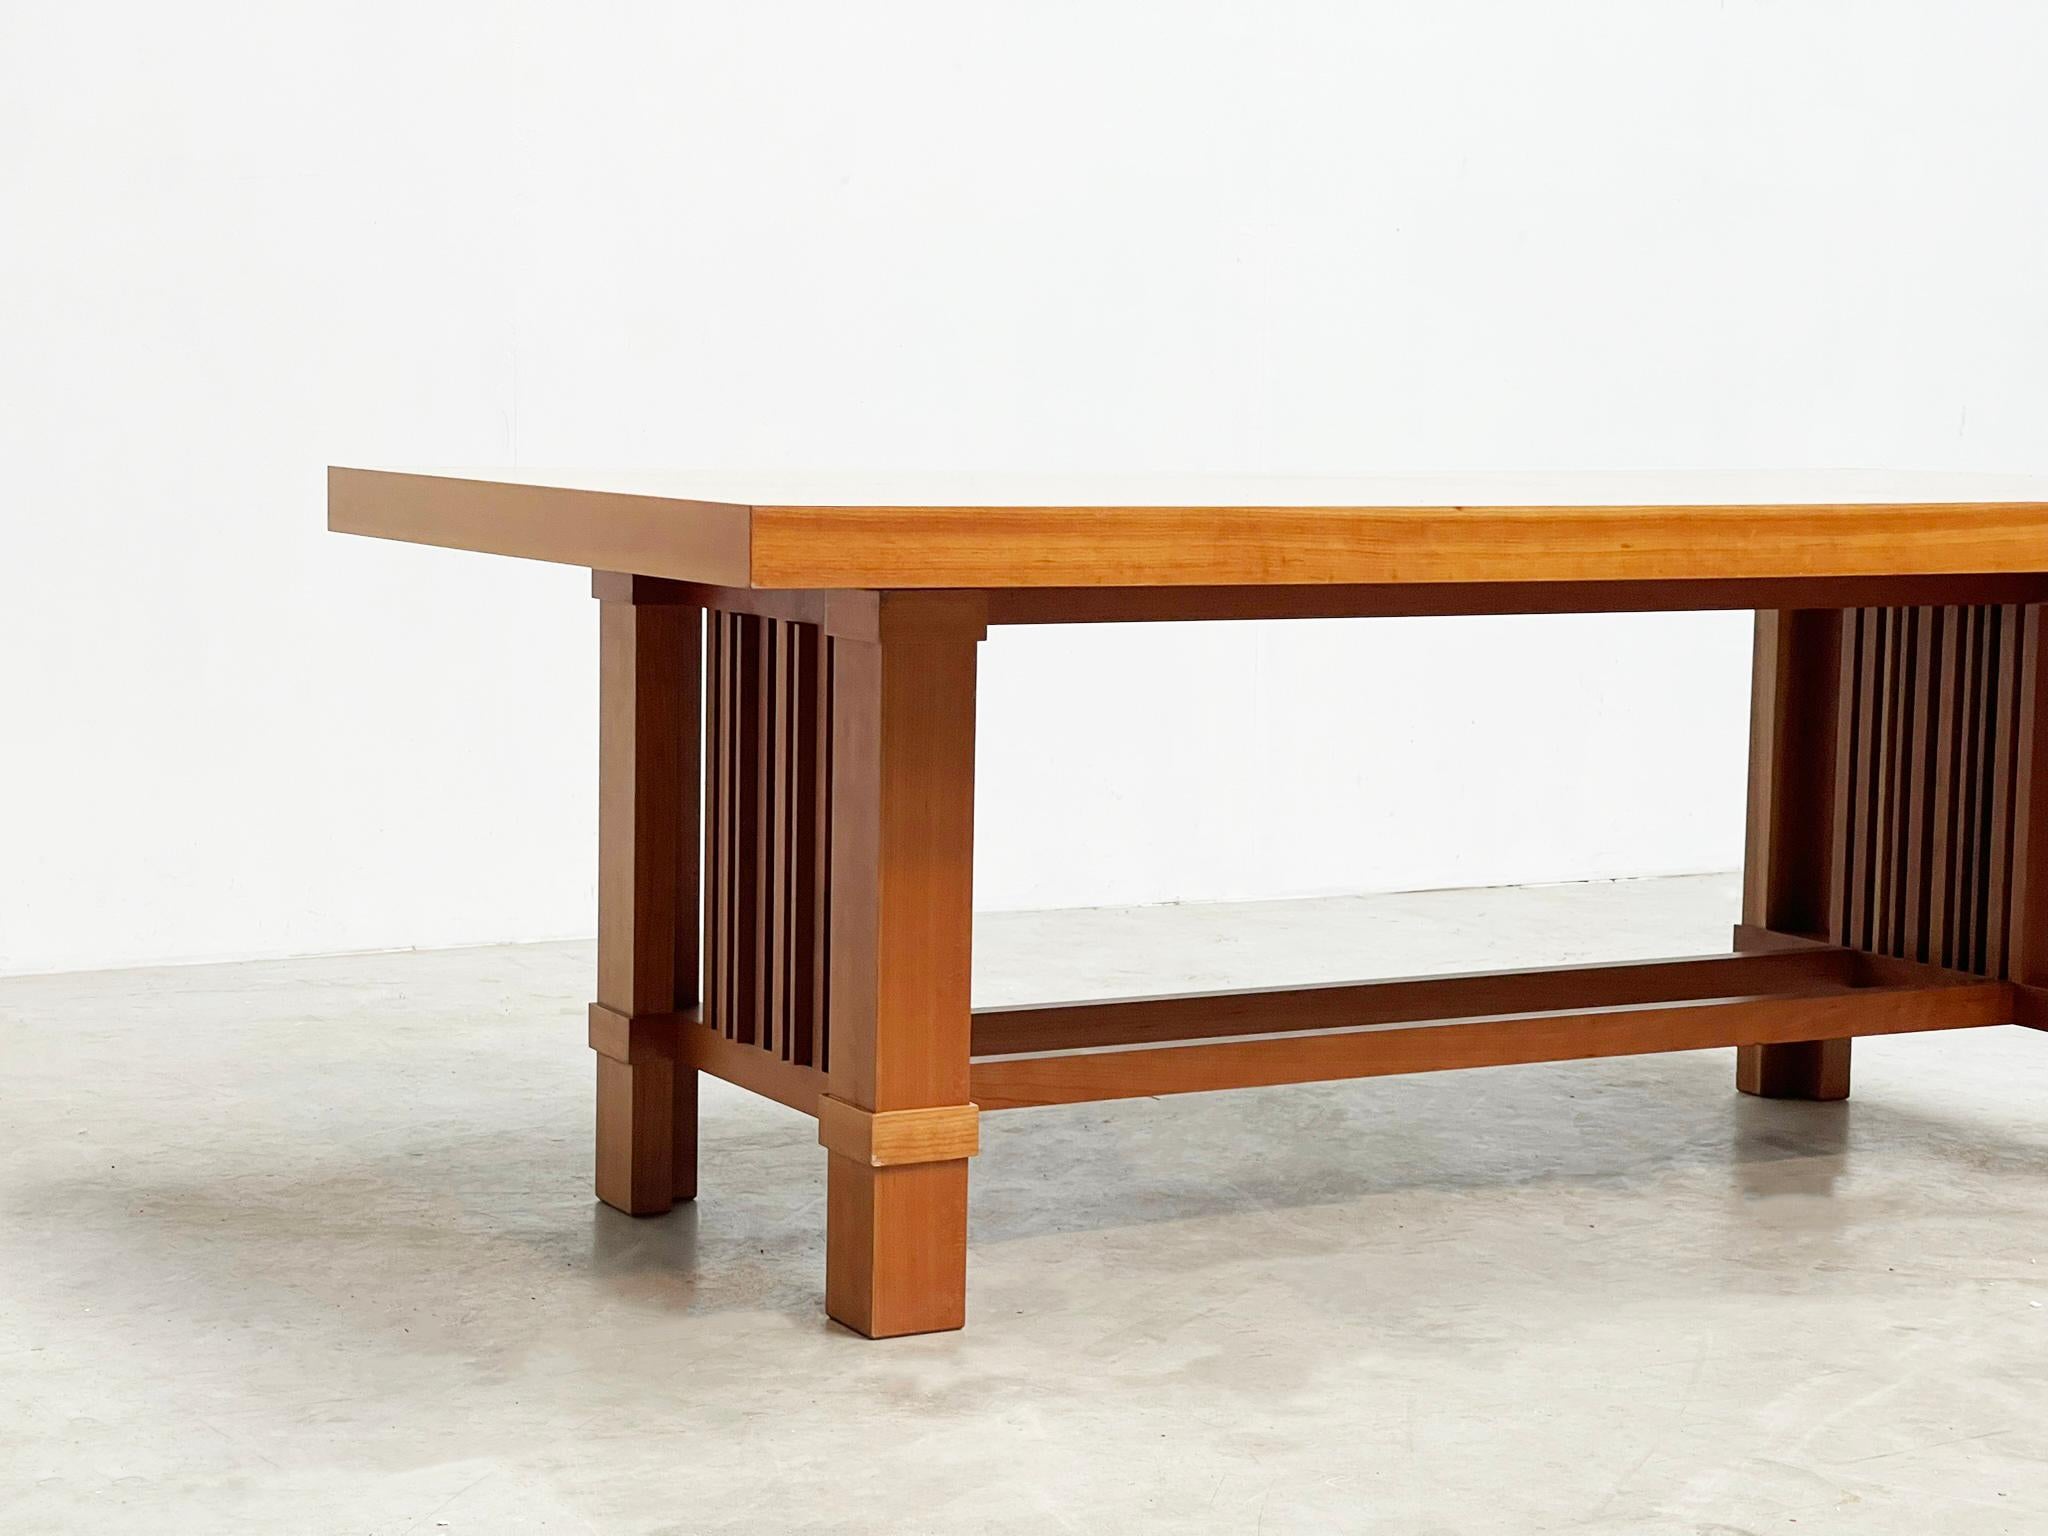 Frank Lloyd Wright “608 Taliesin” Dining Table signed by Cassina, 1986 In Good Condition For Sale In Nijlen, VAN